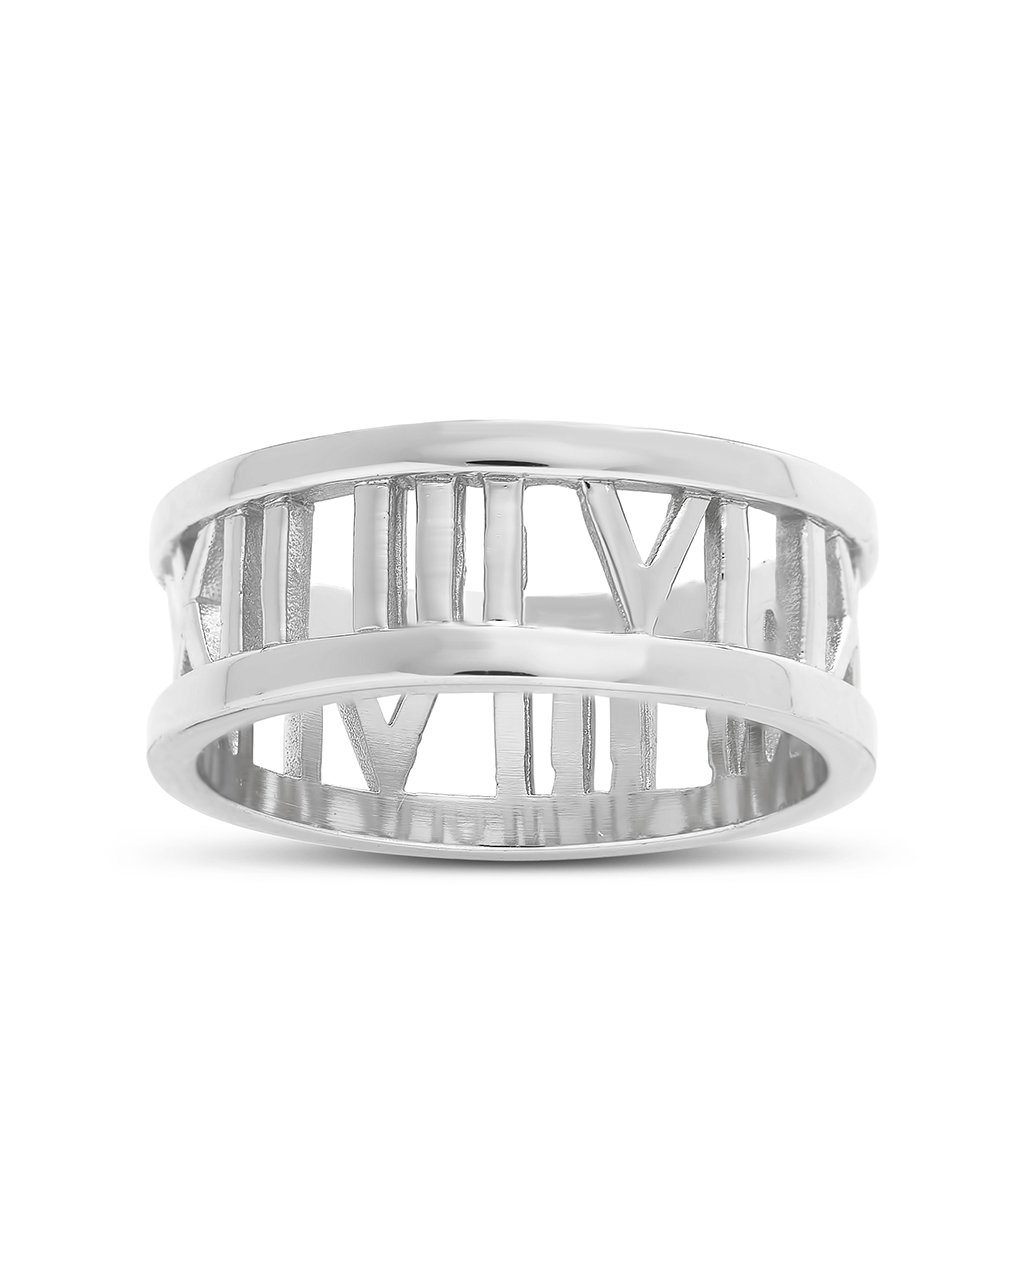 Roman Numeral Bangle in Sterling Silver by oNecklace